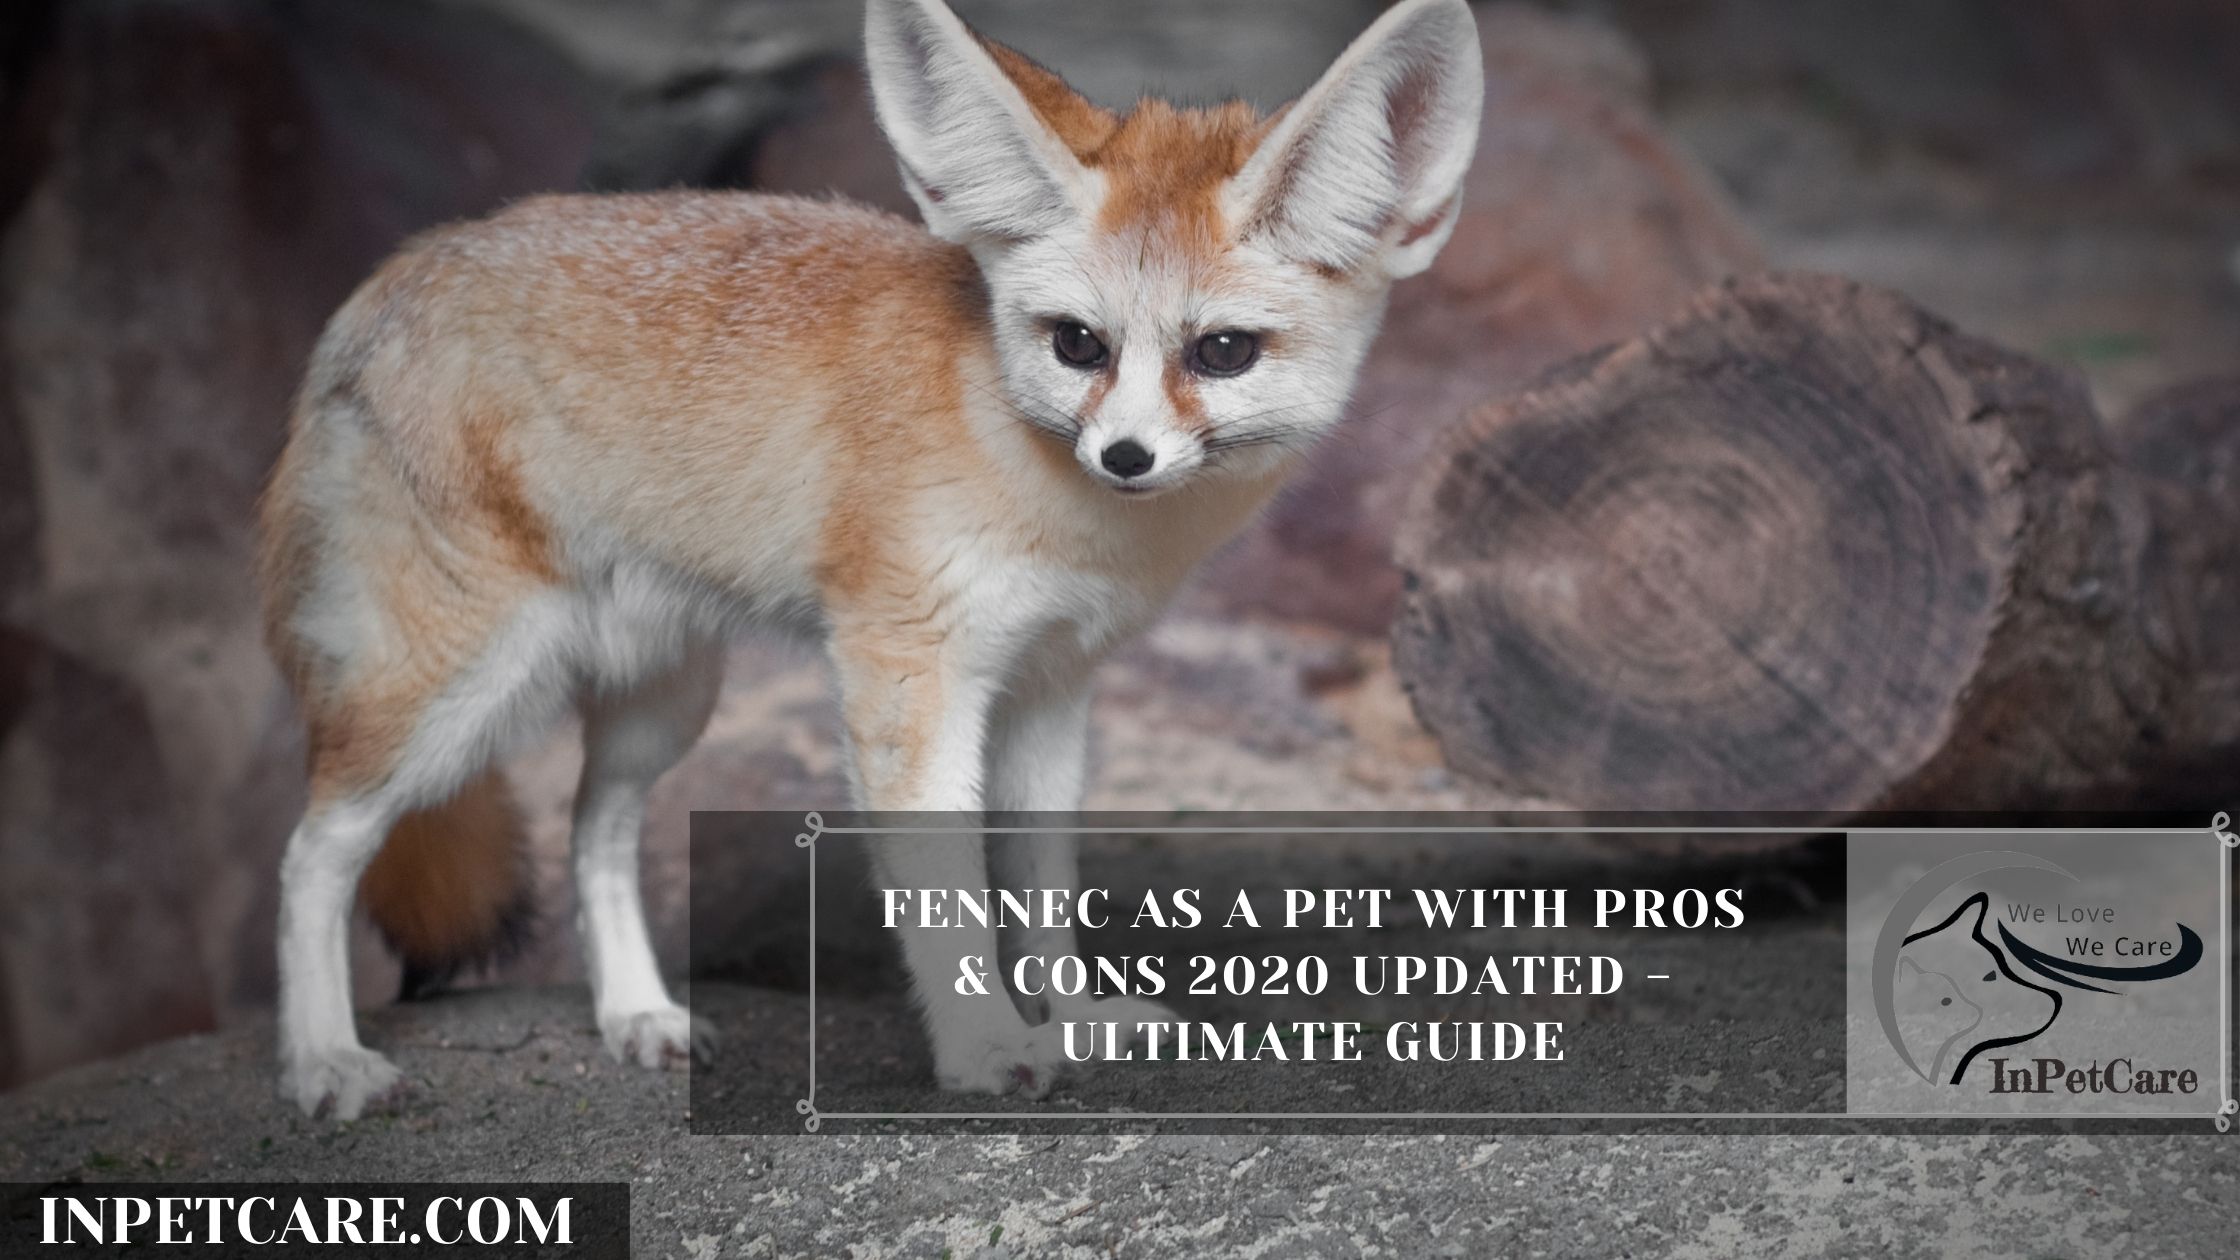 Fennec As A Pet with Pros & Cons 2020 Updated - Ultimate Guide